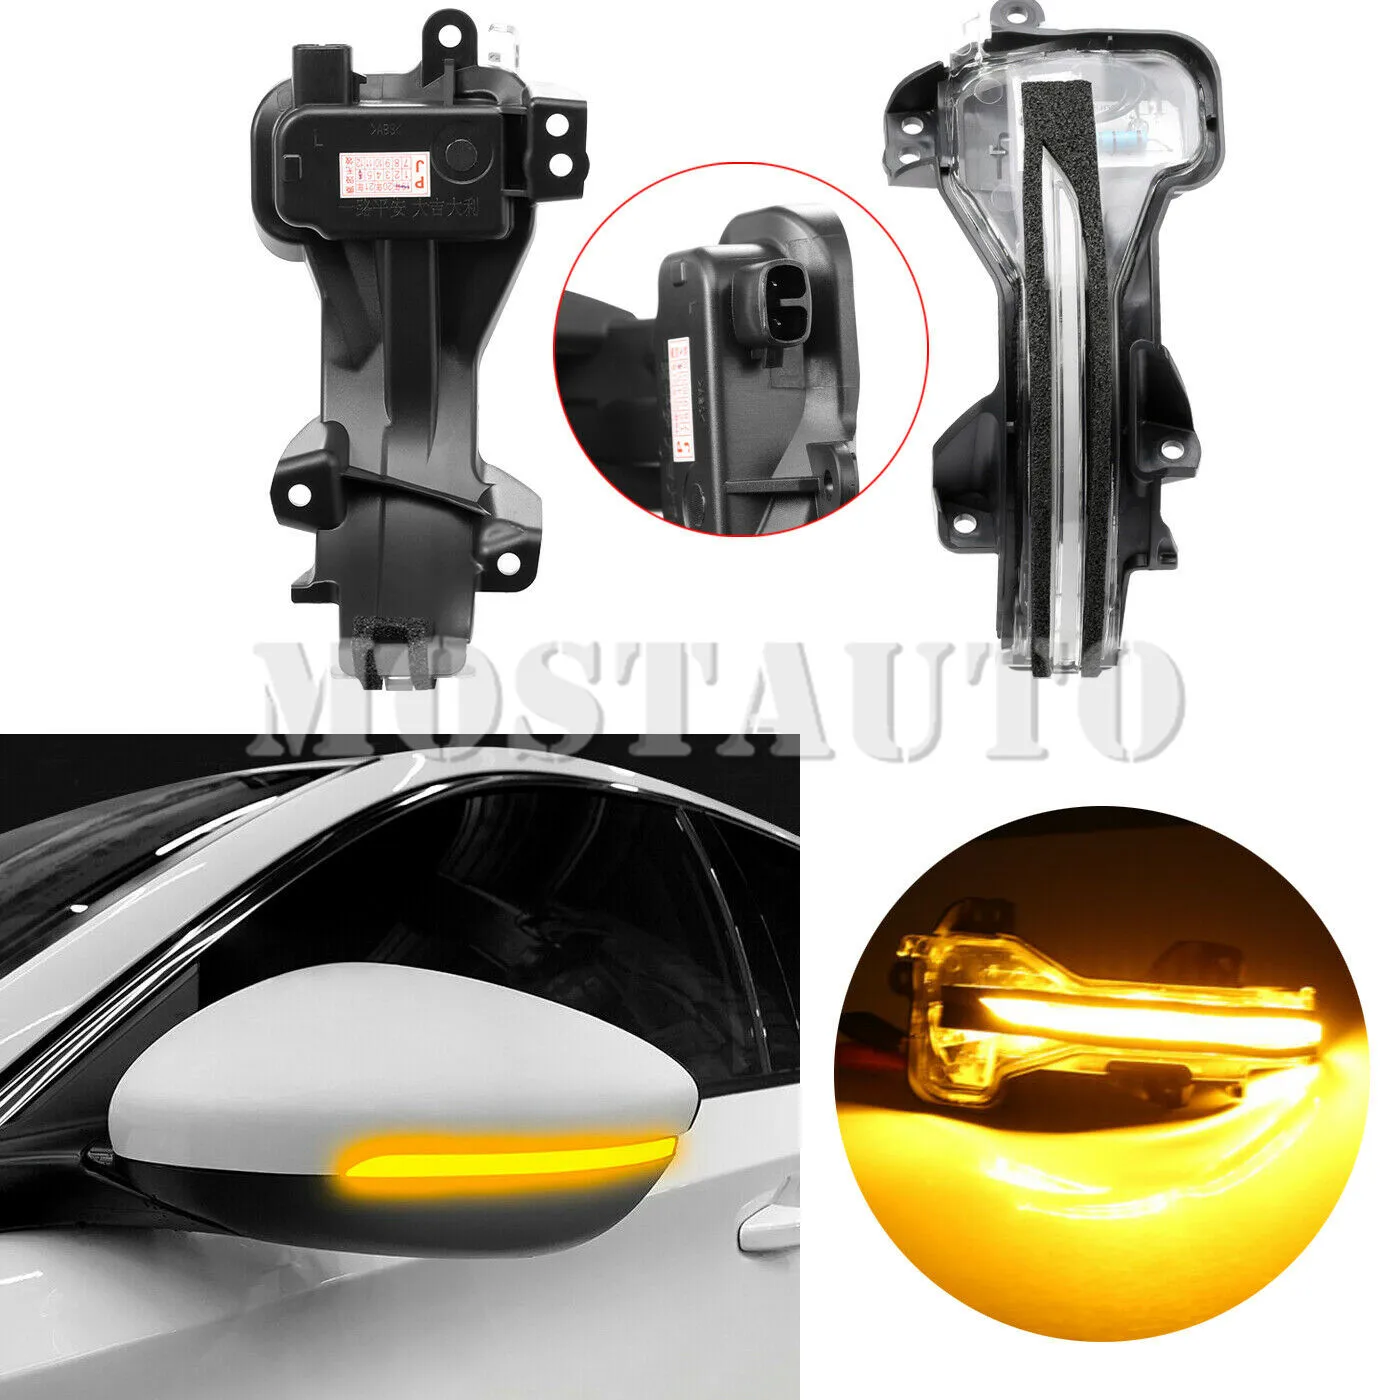 

Yellow LED DynamicTurn Signal Light Side Mirror Lamp For Honda CRV 2012-2018 City 2017-2019 FIT 2014-2019 Rearview mirror light